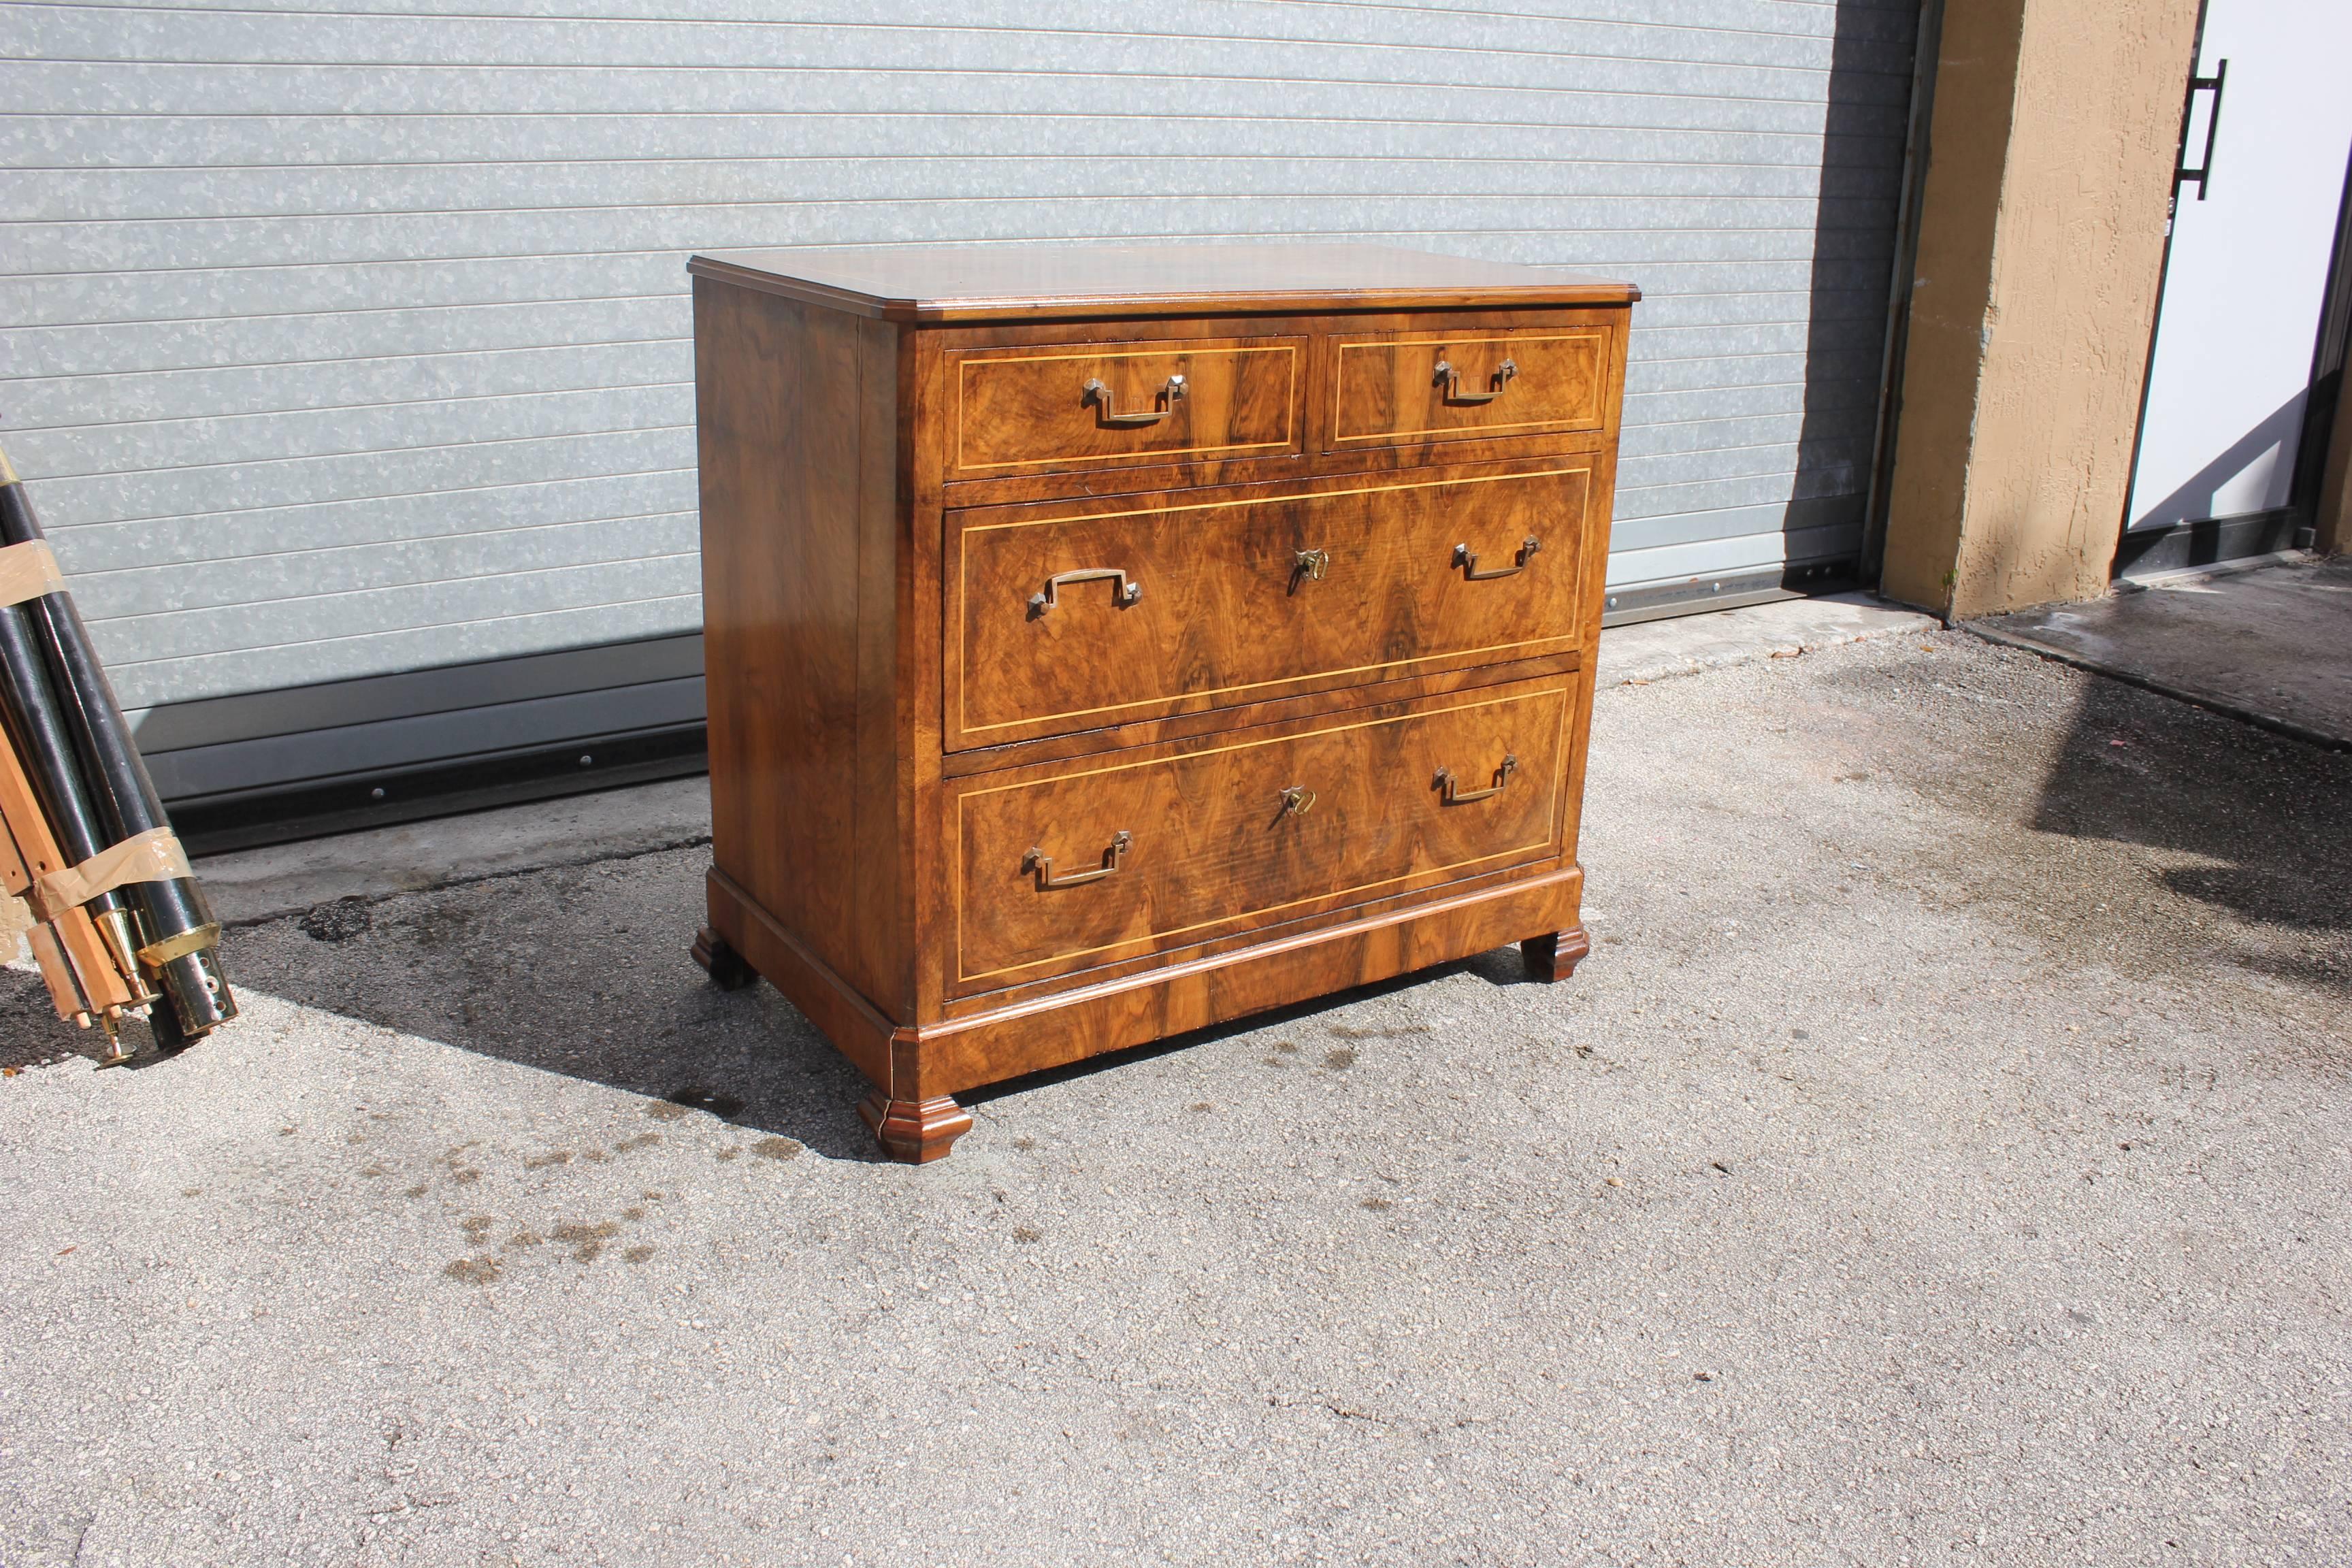 Handsome Louis Philippe commode burl walnut with bookmatched front, having four drawers and raised on mounded bracket feet. The simple elegant lines of this antique French chest make it suitable for many interiors from Bordeaux, France.